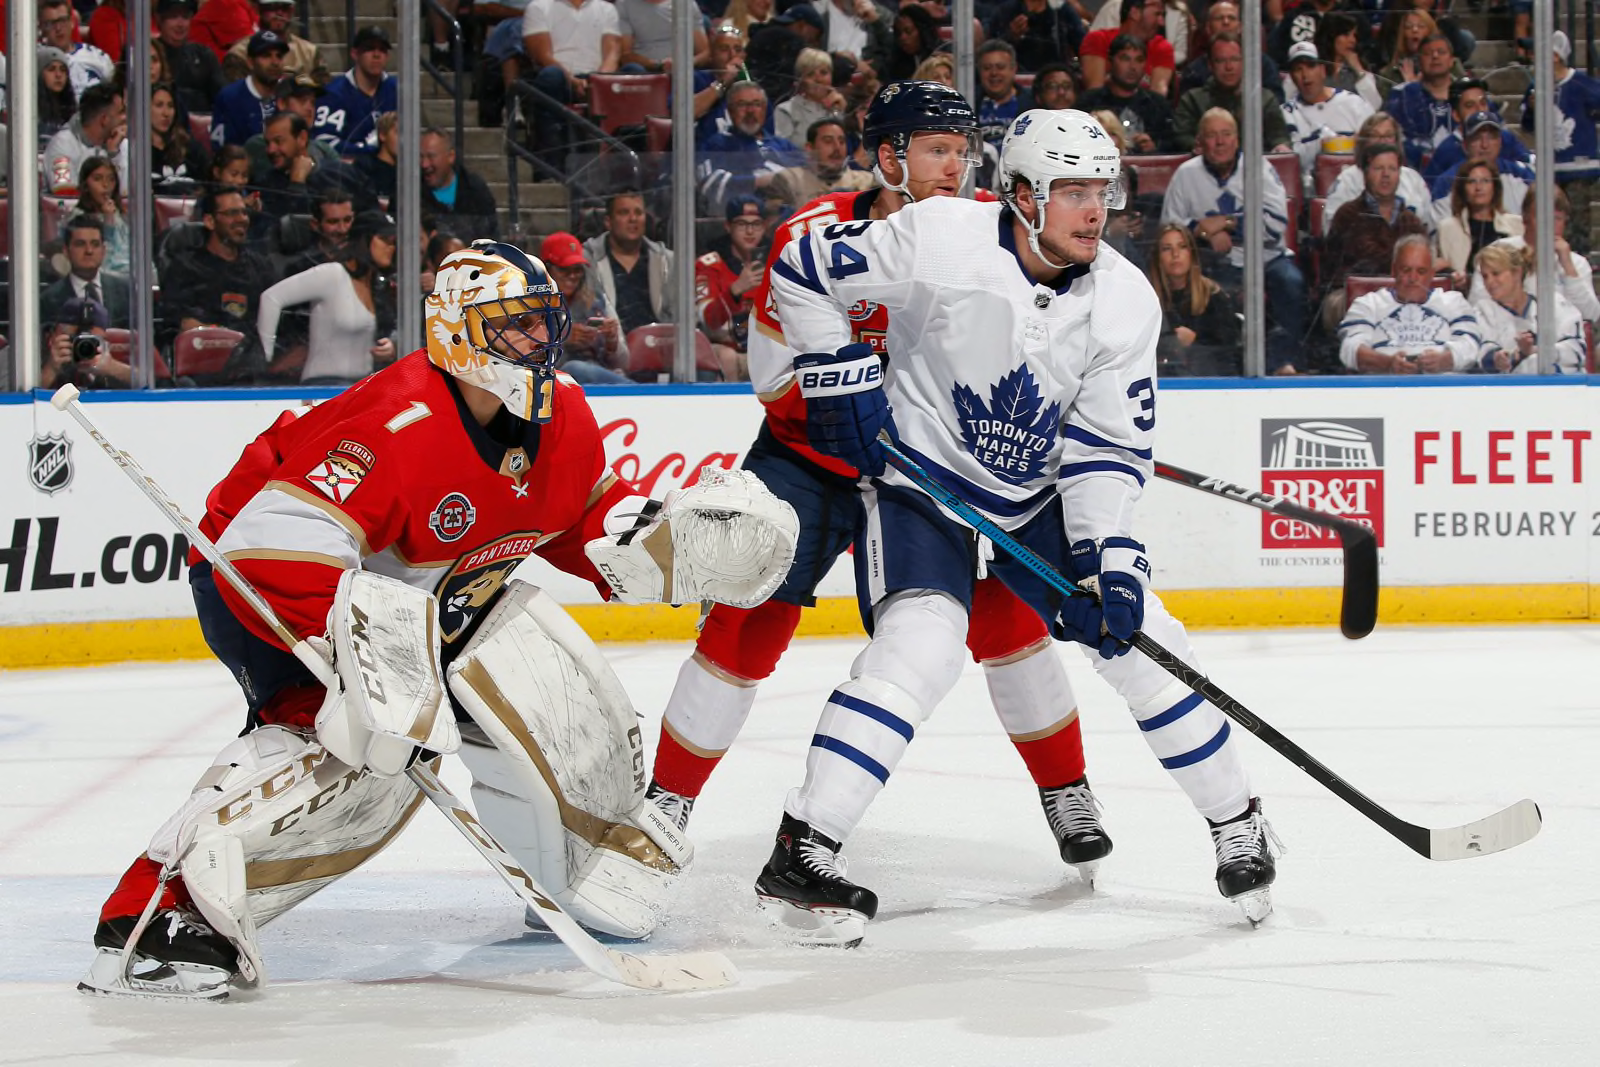 Roberto Luongo Toronto Maple Leafs jersey on sale in Ontario; why, exactly?